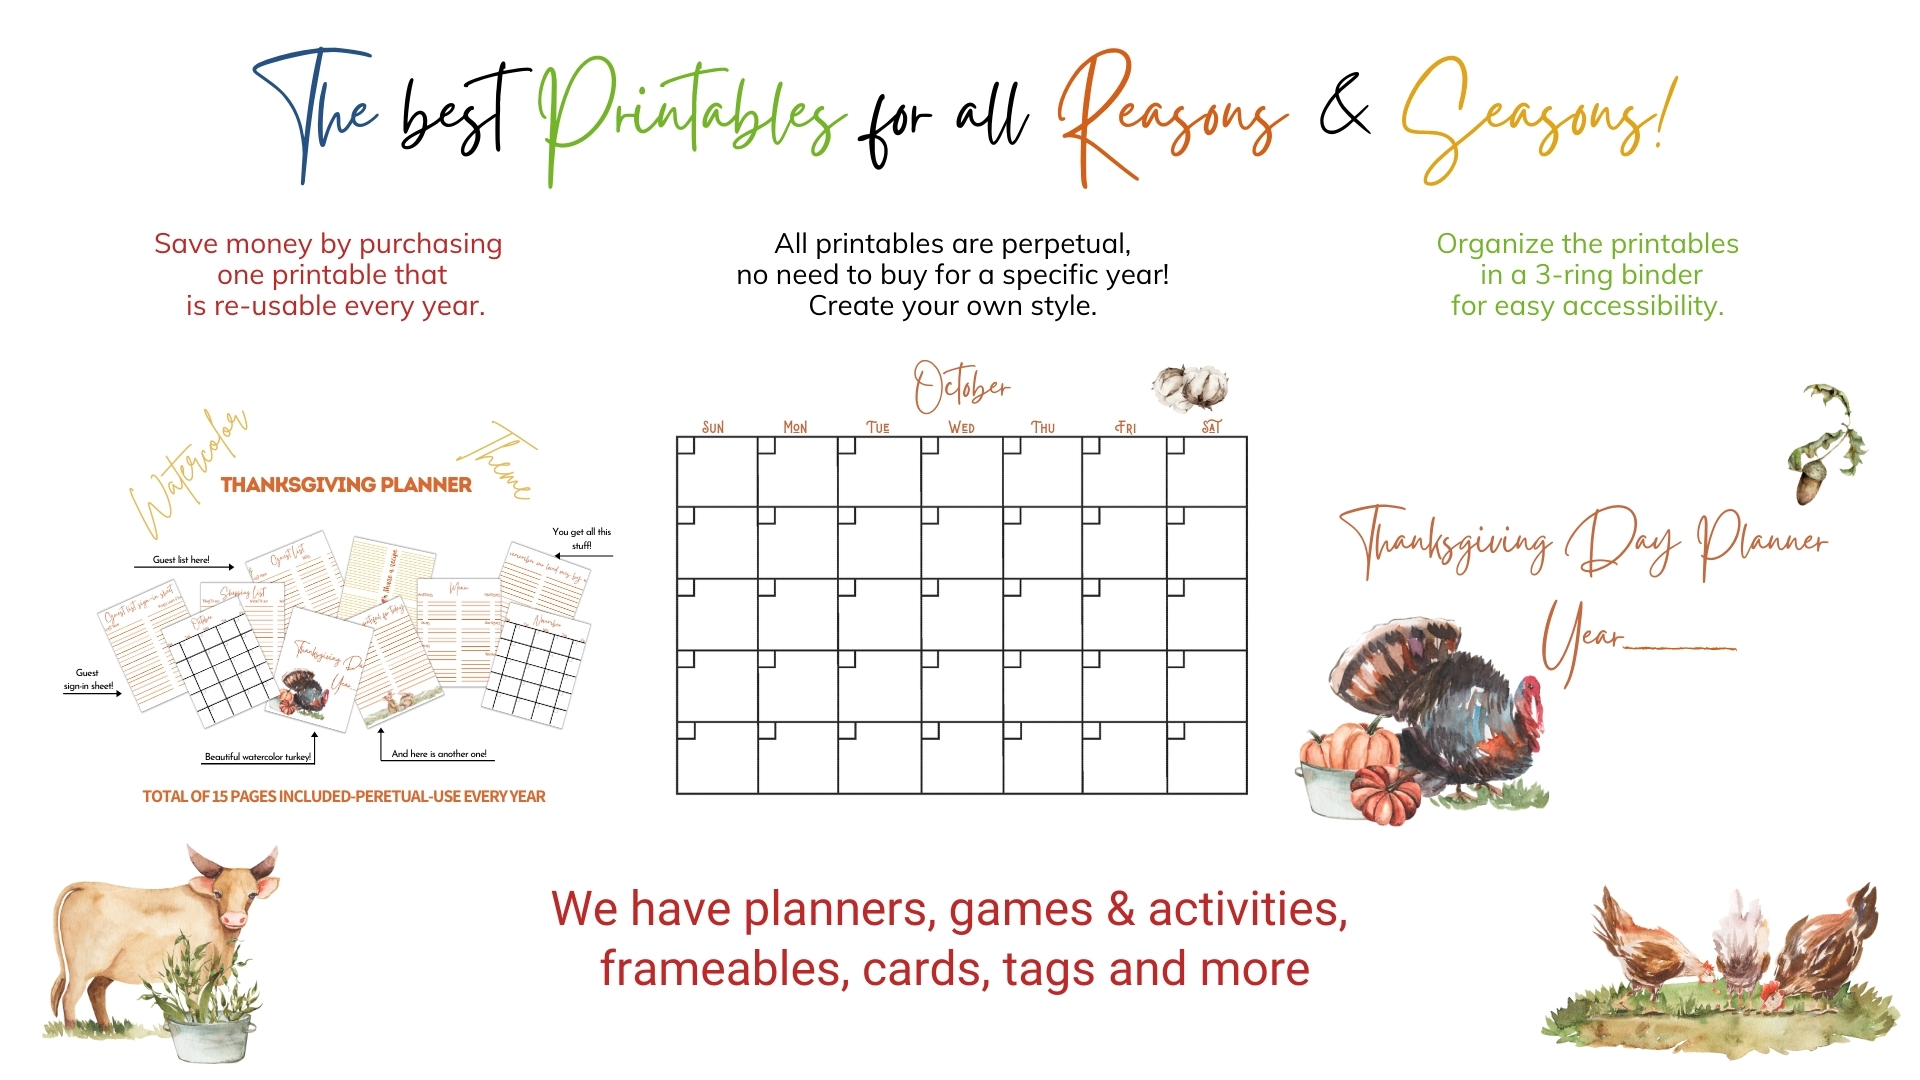 High quality printables to make your life EASIER than before! 